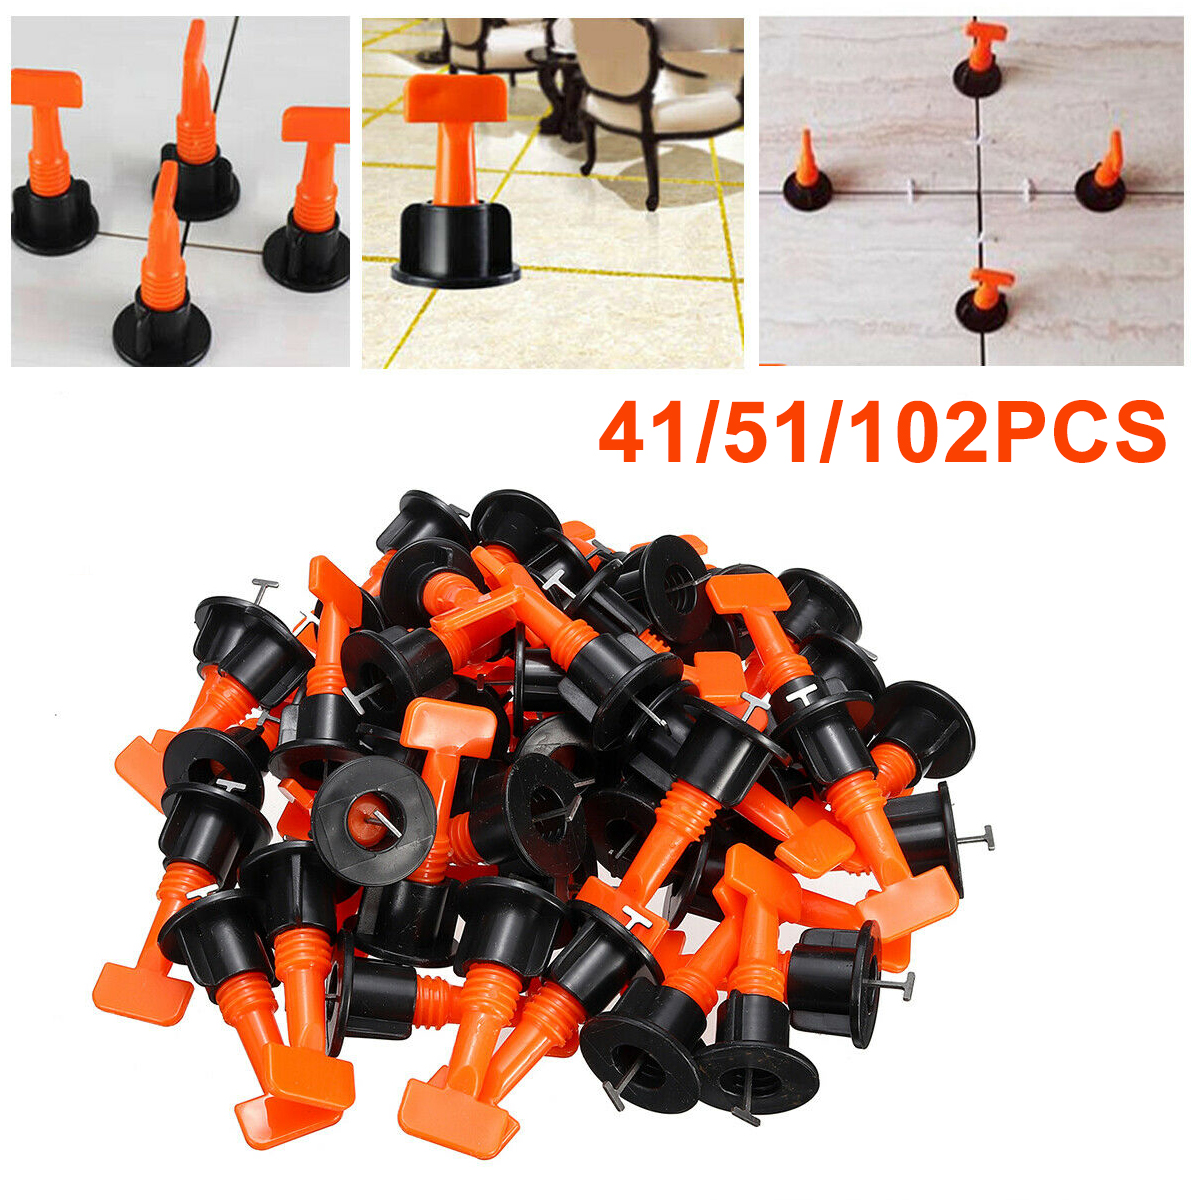 41-102pcs-Ceramic-Floor-Wall-Construction-Tool-Tile-Leveling-System-Kit-Spacers-1623068-1